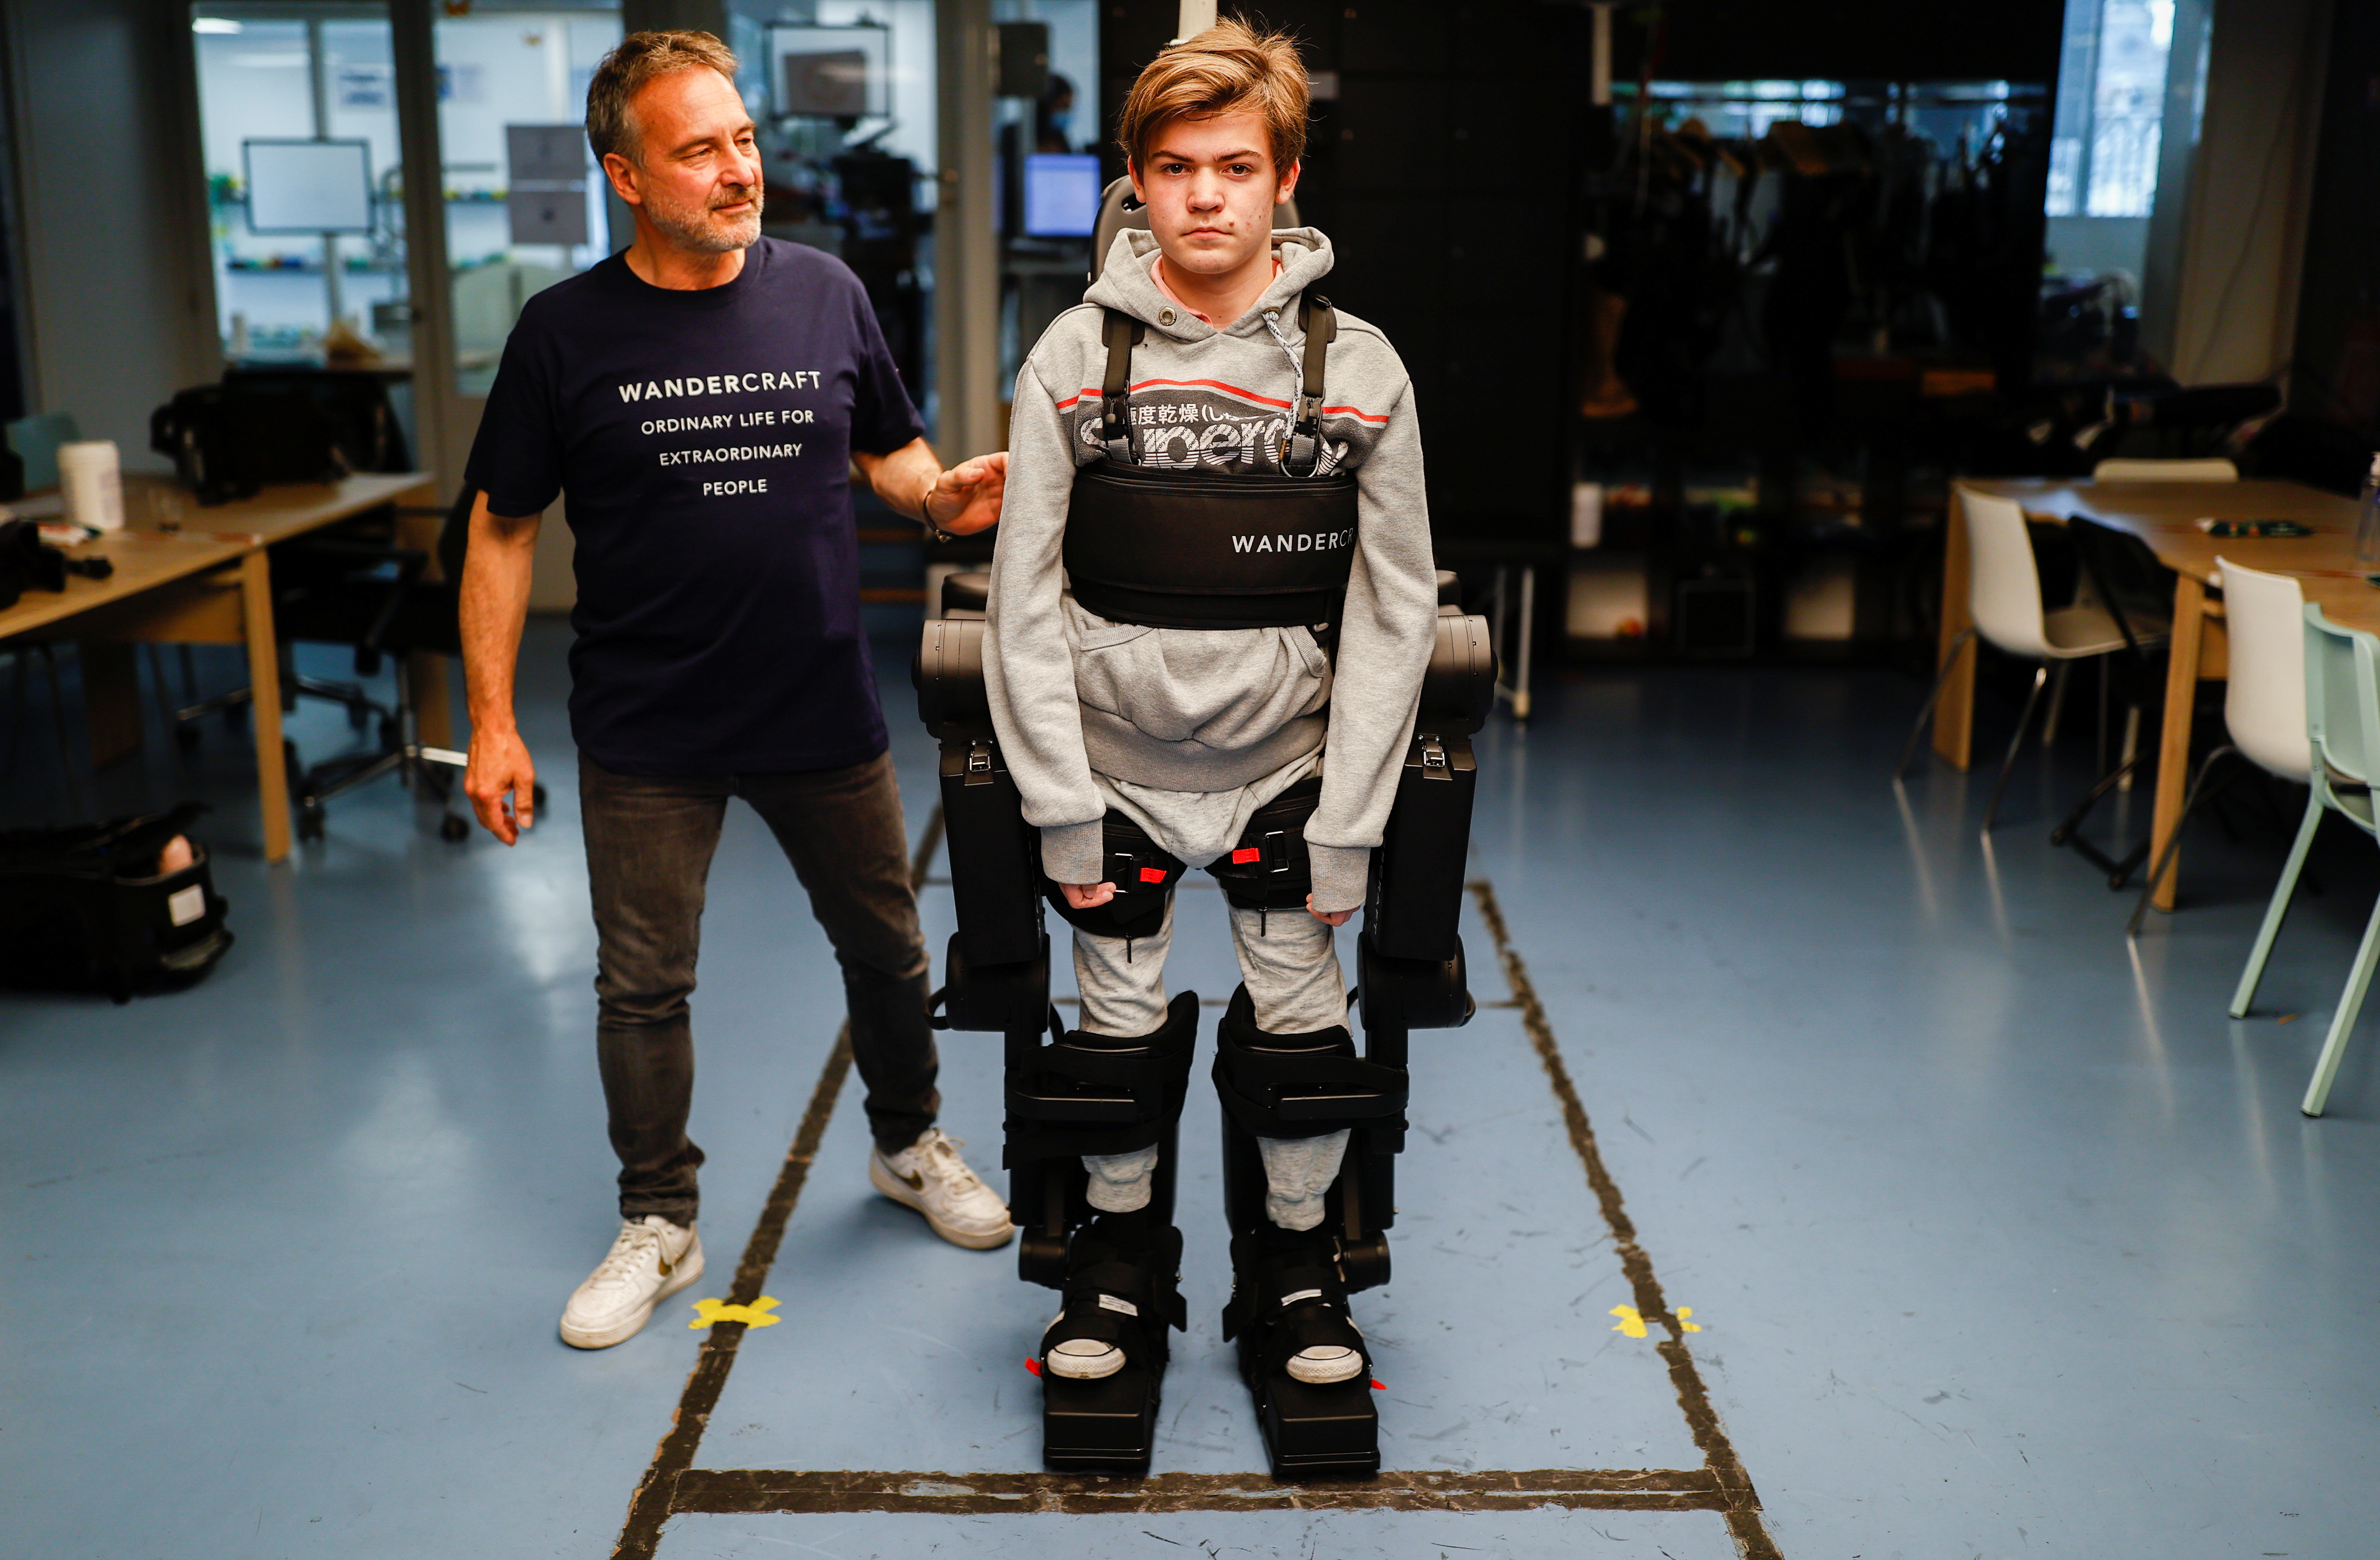 Jean-Louis Constanza, Chief Business and Clinical Officer at French company Wandercraft helps his 16-year-old son Oscar using a robot exoskeleton at the company headquarters in Paris, France July 9, 2021. Picture taken July 9, 2021. REUTERS/Christian Hartmann